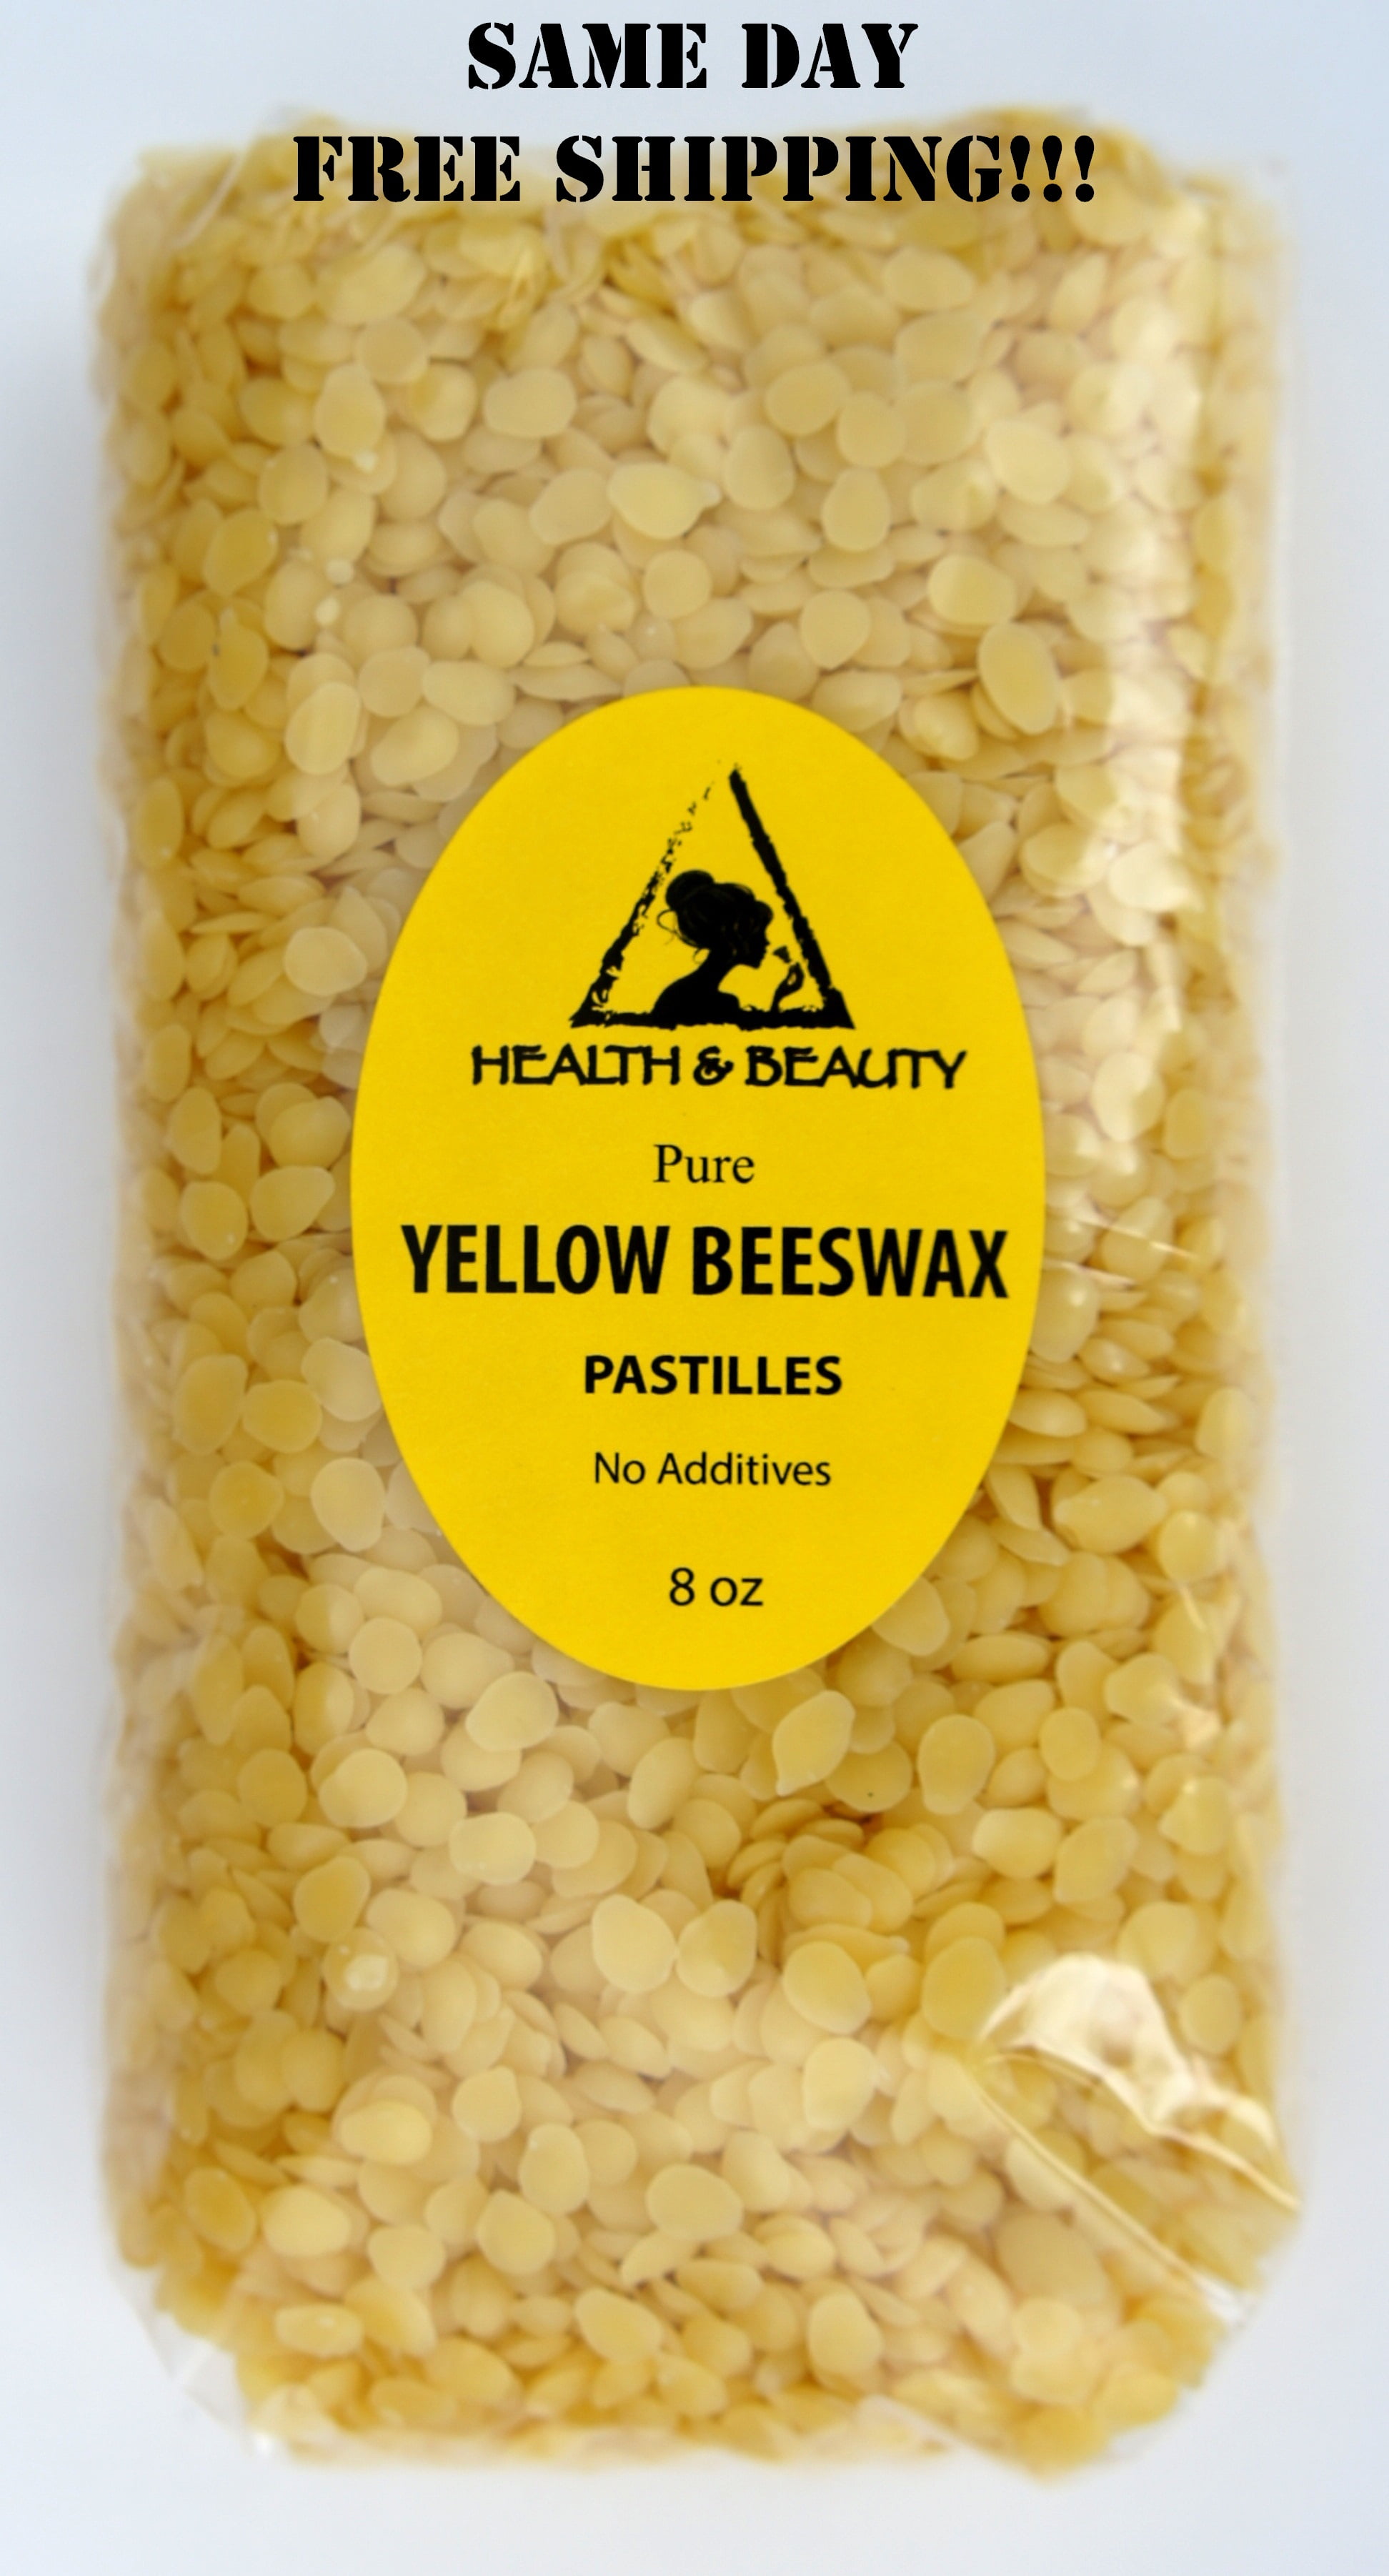 White Beeswax Pellets 1 lb, Organic, Pure, Natural, Cosmetic Grade